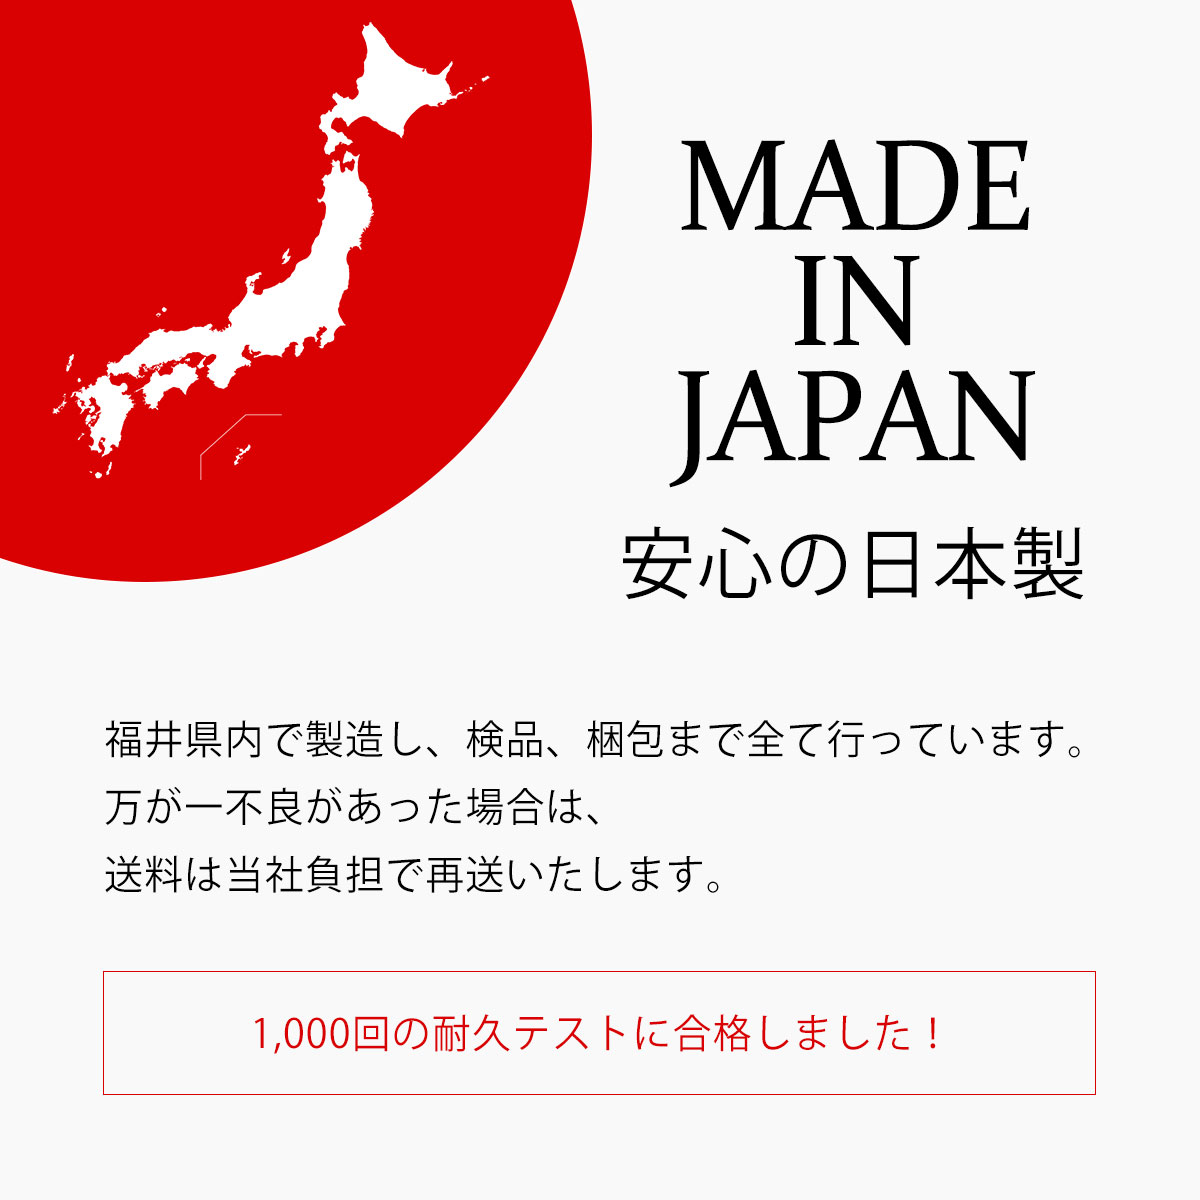 MADE IN JAPAN 安心の日本製